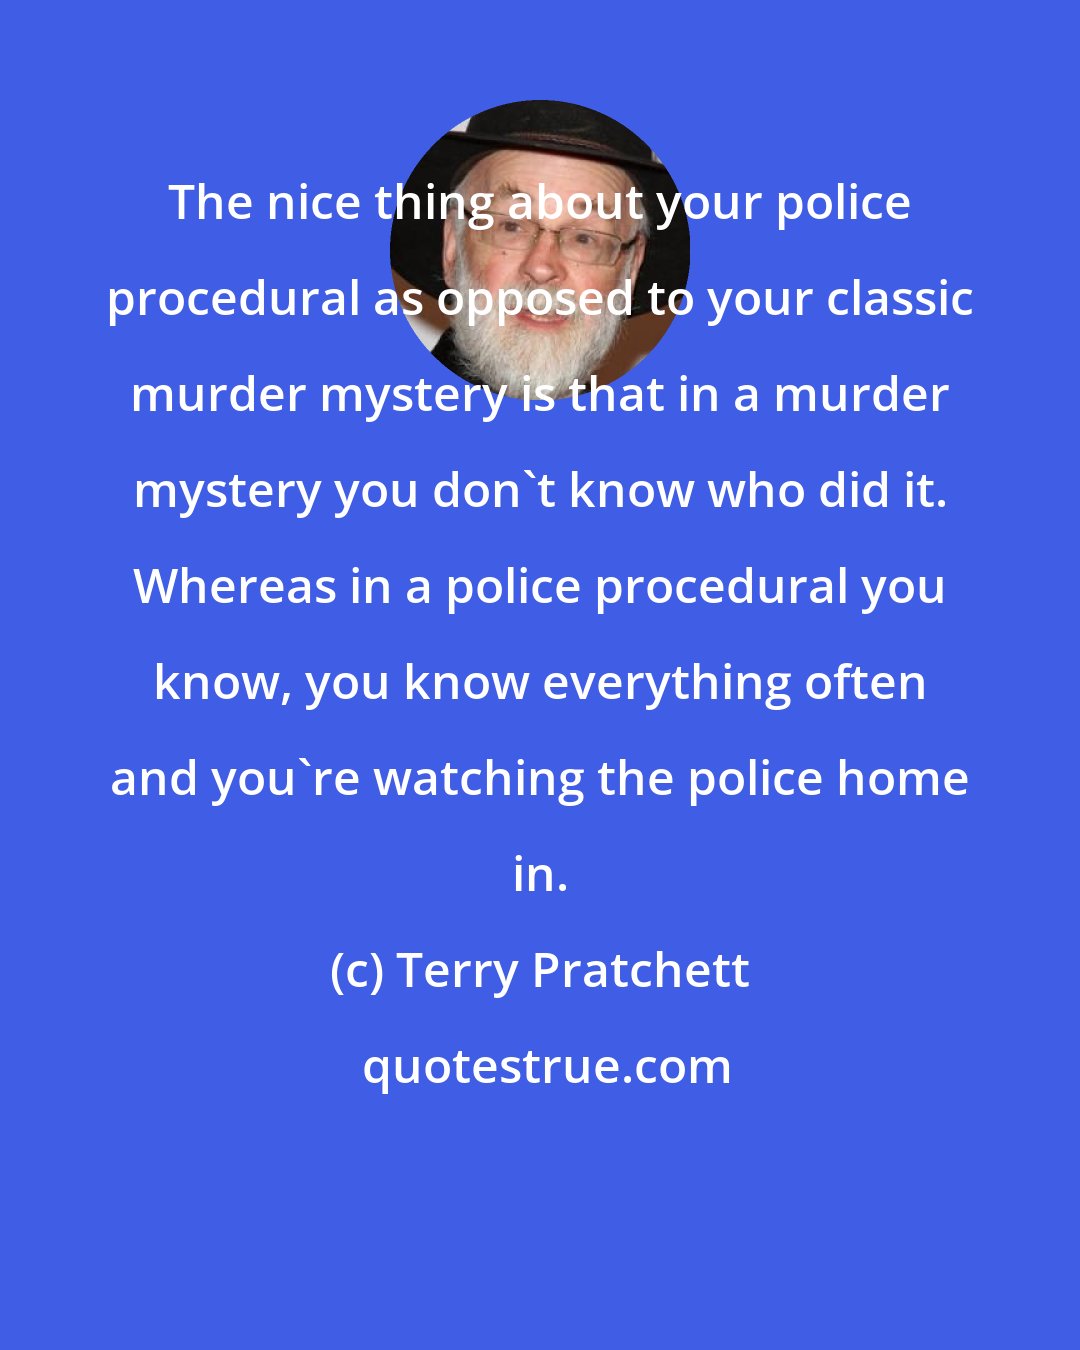 Terry Pratchett: The nice thing about your police procedural as opposed to your classic murder mystery is that in a murder mystery you don't know who did it. Whereas in a police procedural you know, you know everything often and you're watching the police home in.